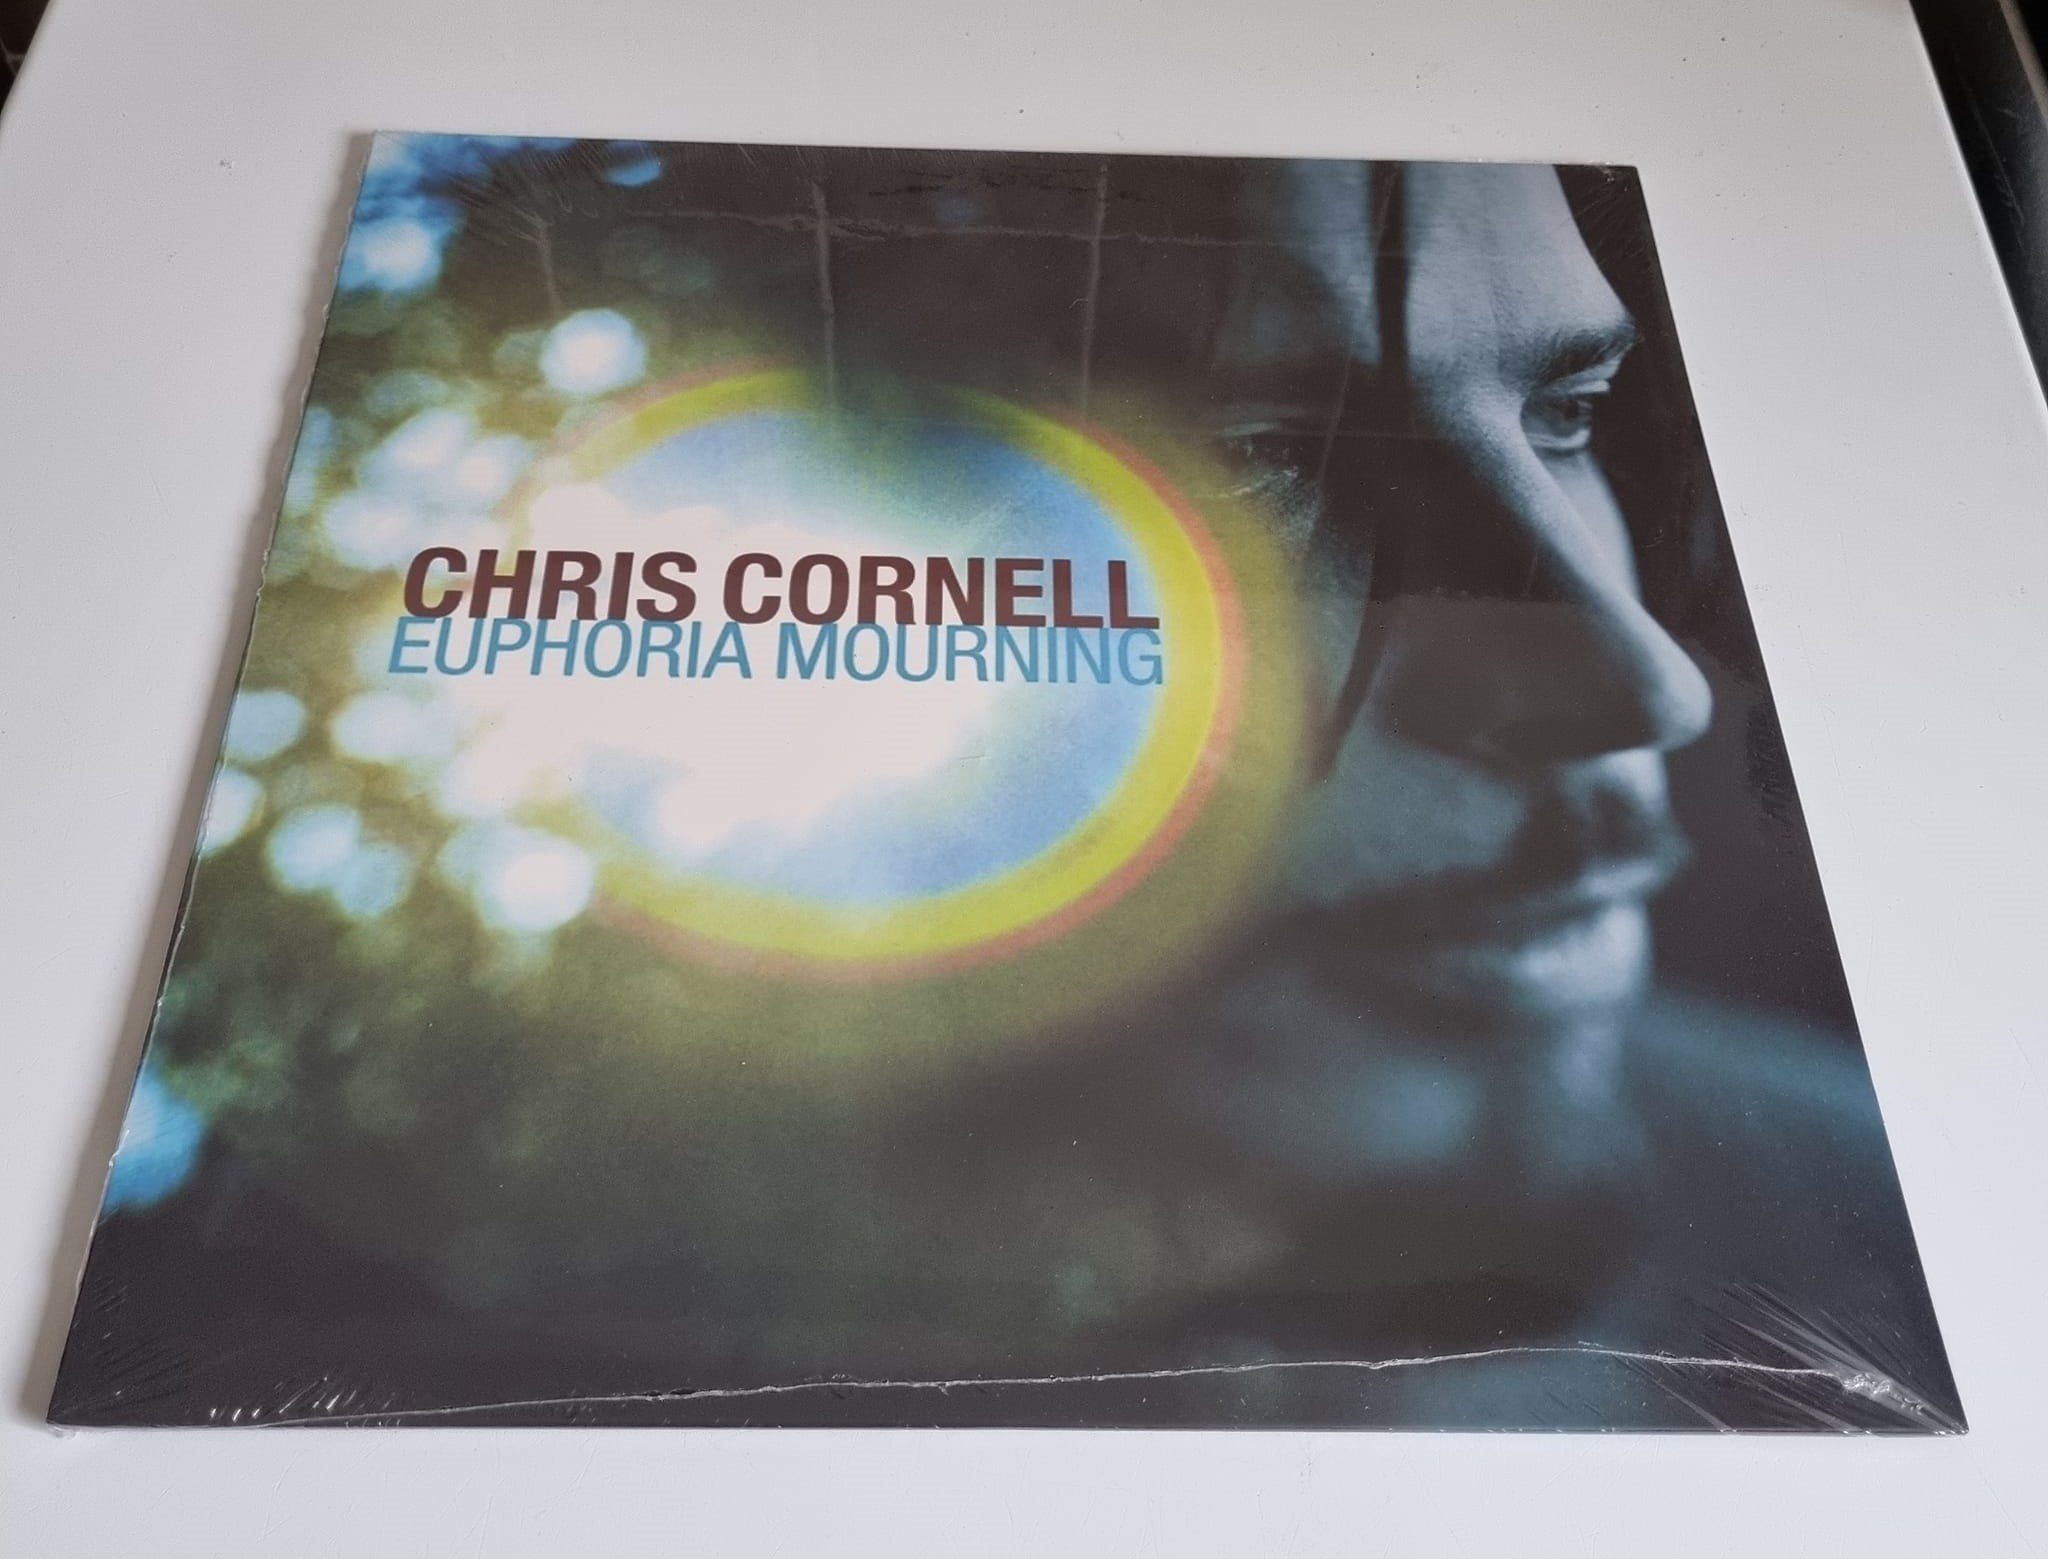 Buy this rare Chris Cornell record by clicking here